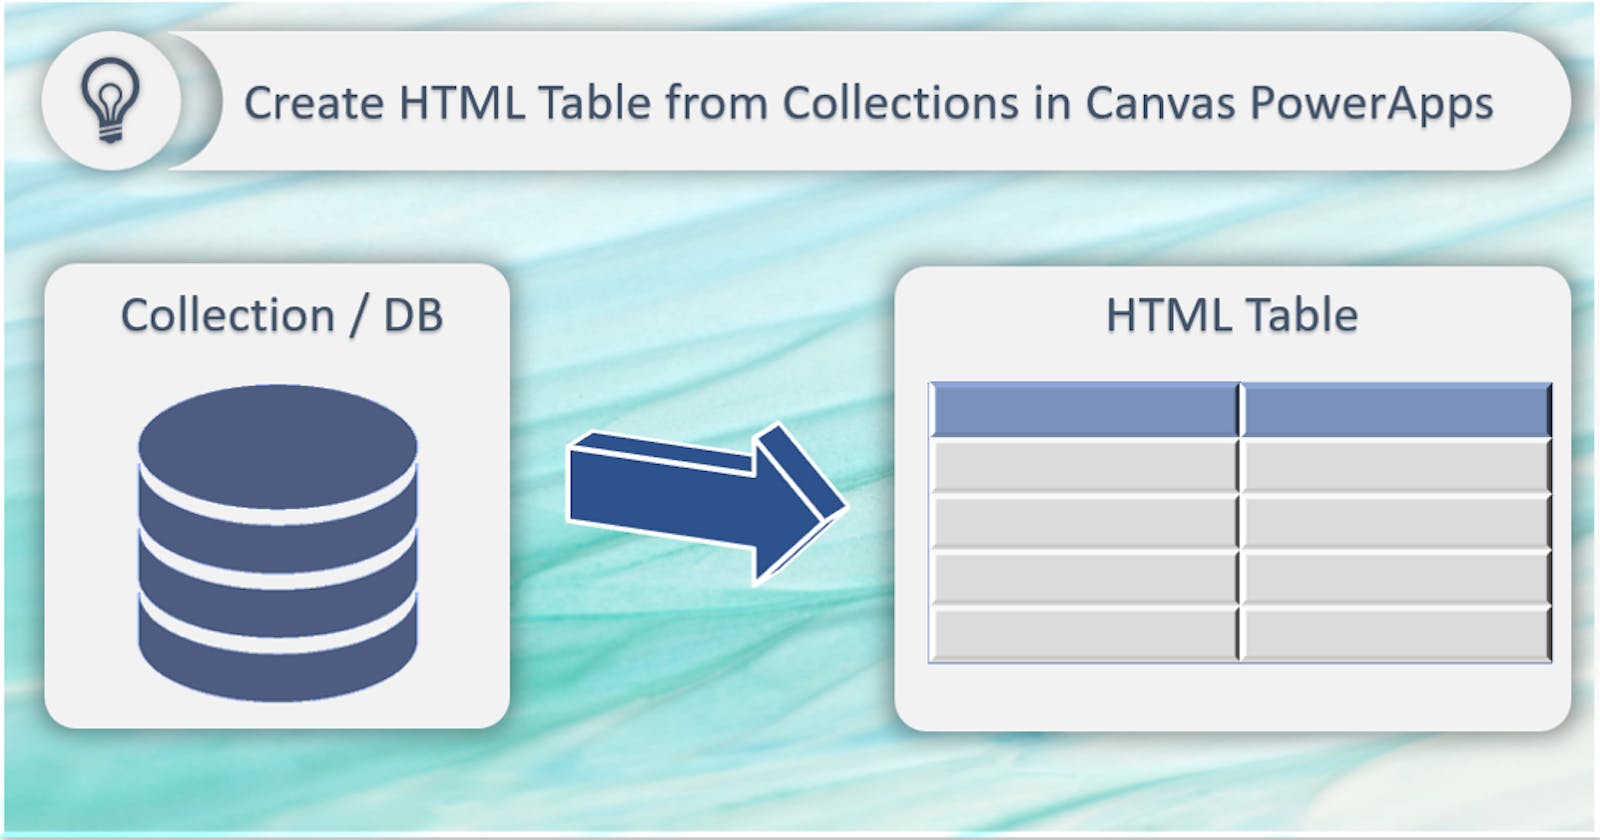 Tip: Create HTML Table from Collections in Canvas PowerApps